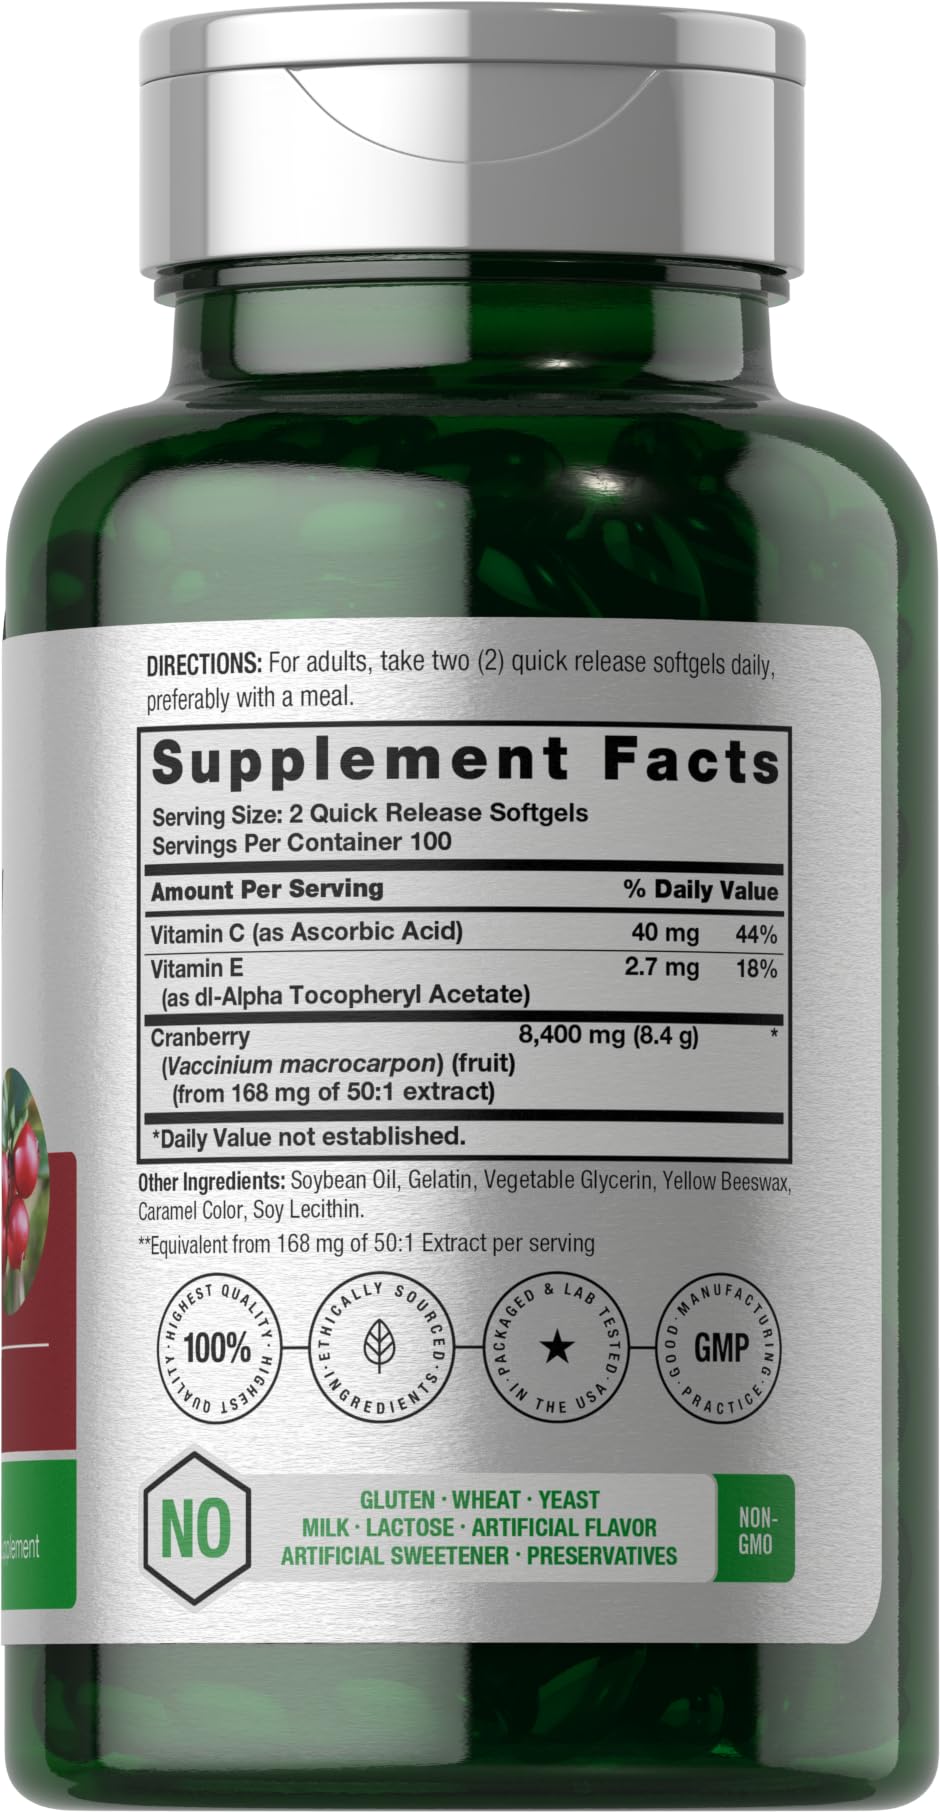 Cranberry Pills with Vitamin C | 8400mg | 200 Softgels | Concentrate Extract Supplement | Non-GMO, Gluten Free by Horbaach